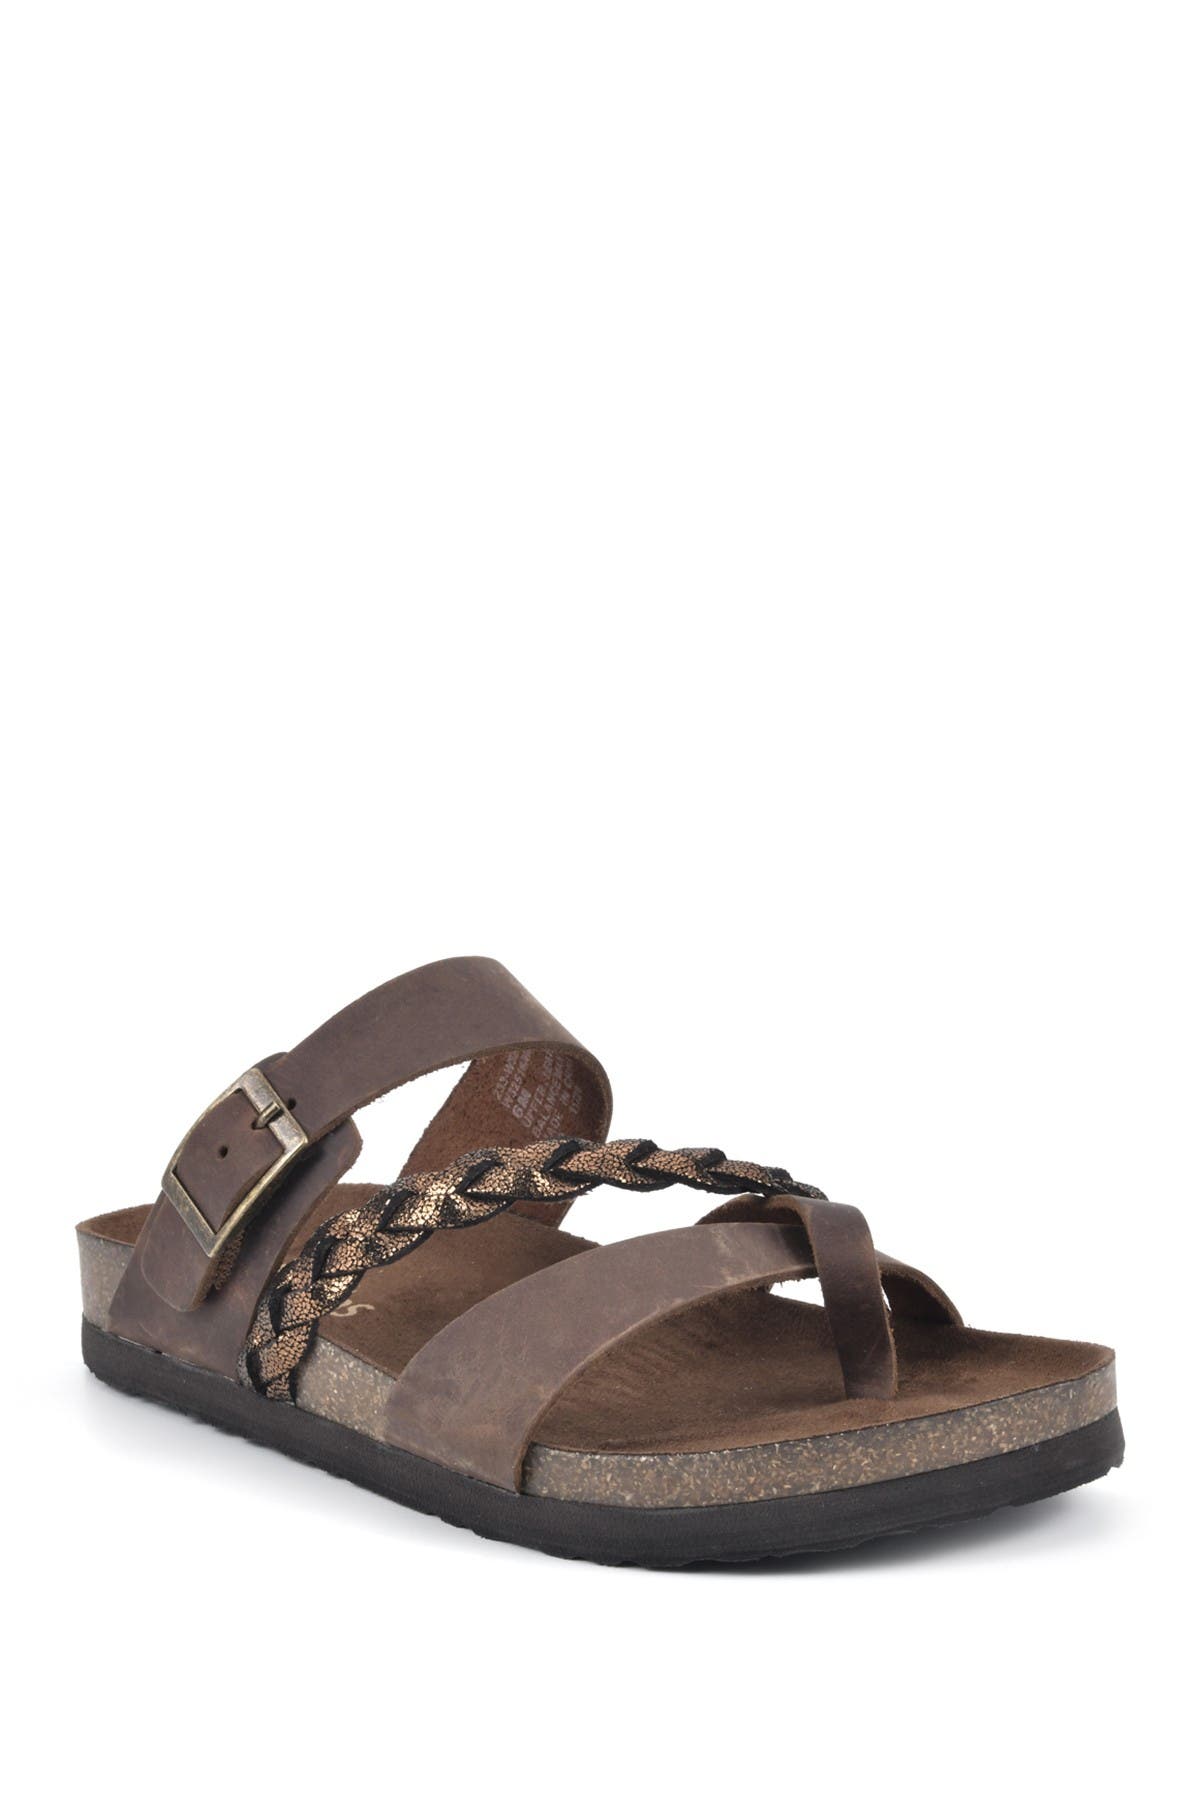 White Mountain Footwear Hazy Leather Footbed Sandal In Brown/bronze/multi